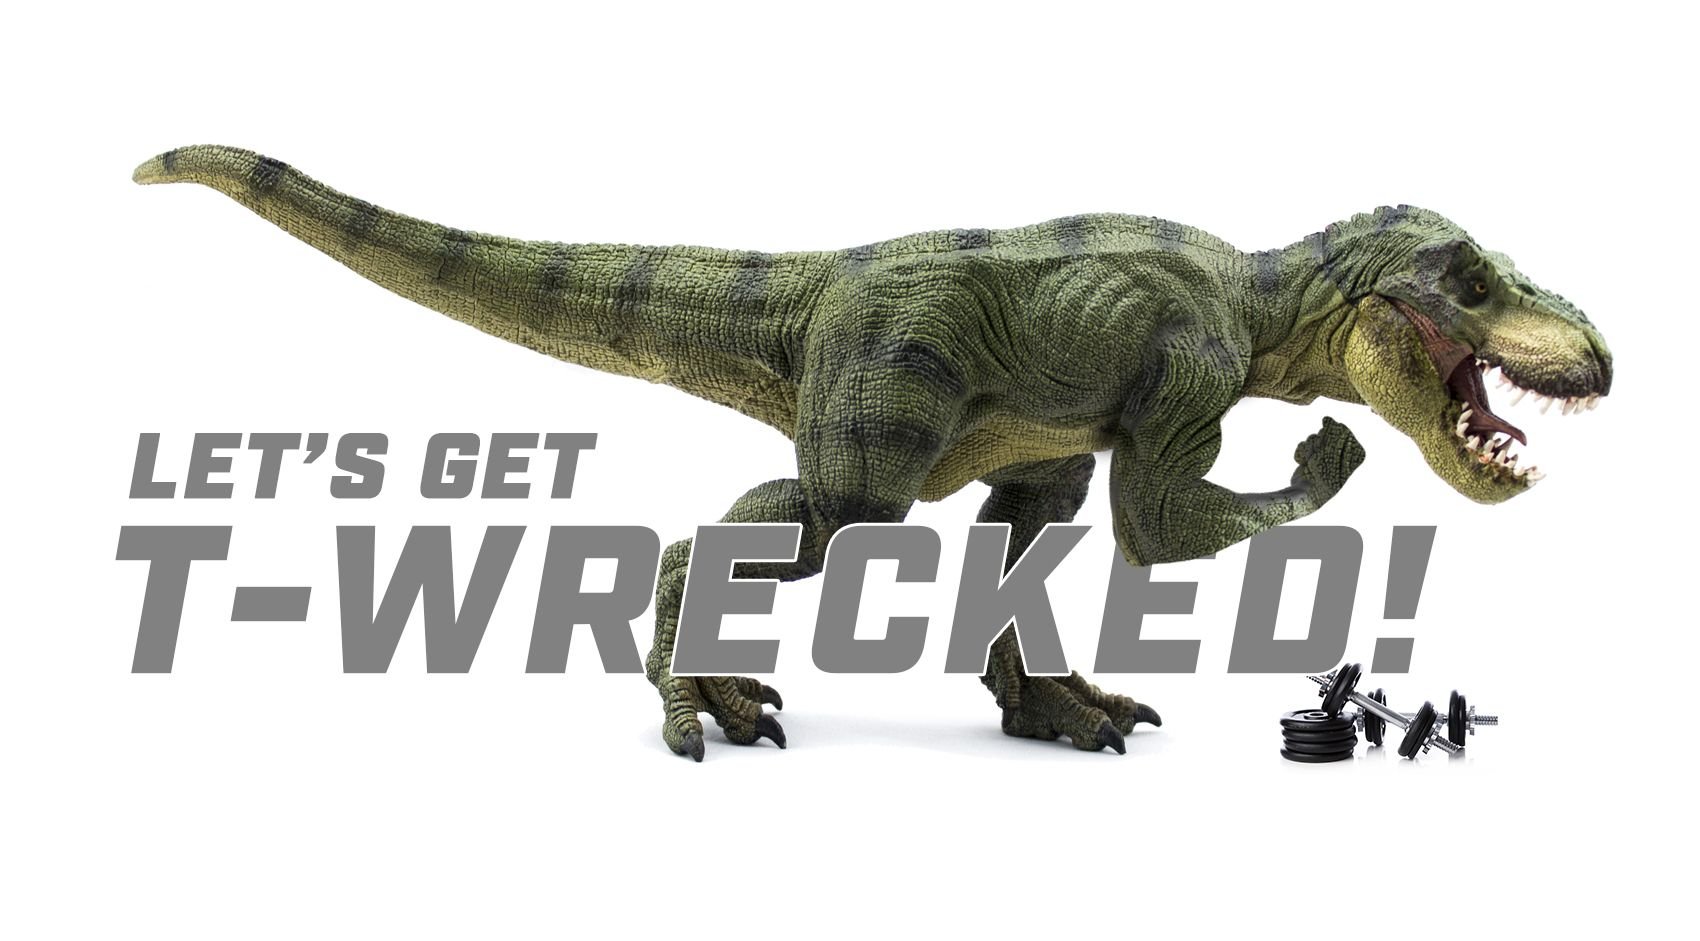 6 Tricep Exercises so Easy a Tyrannosaurus Rex Could Do Them